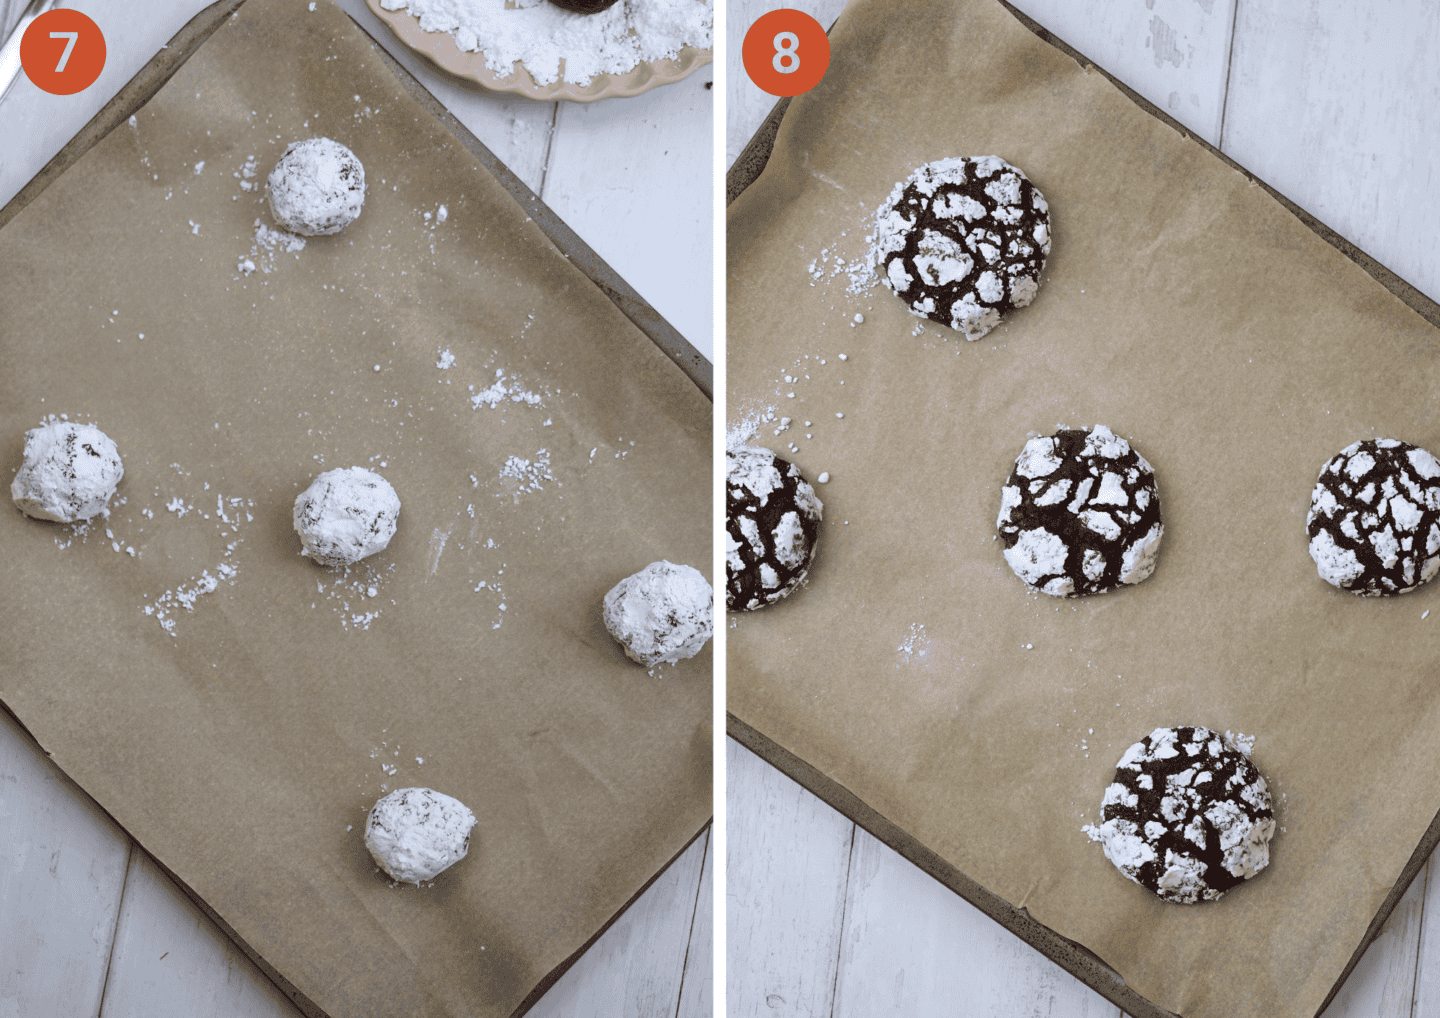 The gluten free crinkle cookies before and after baking.